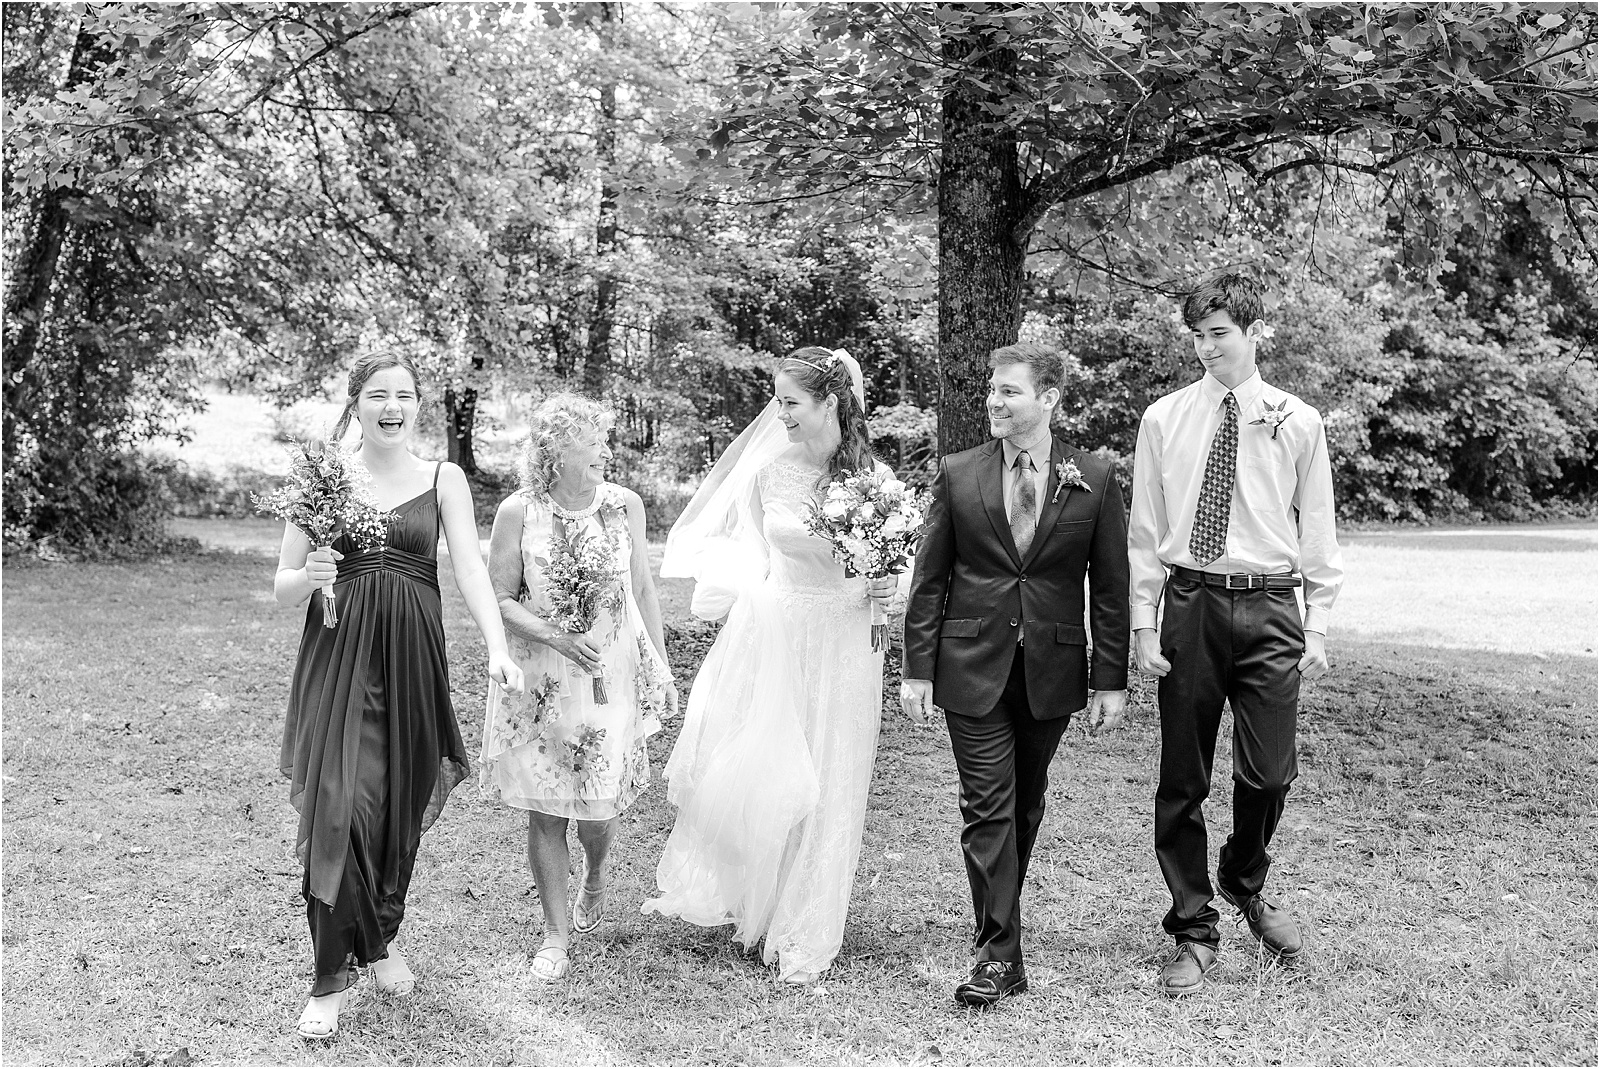 Groom and bride walking in woods with friends